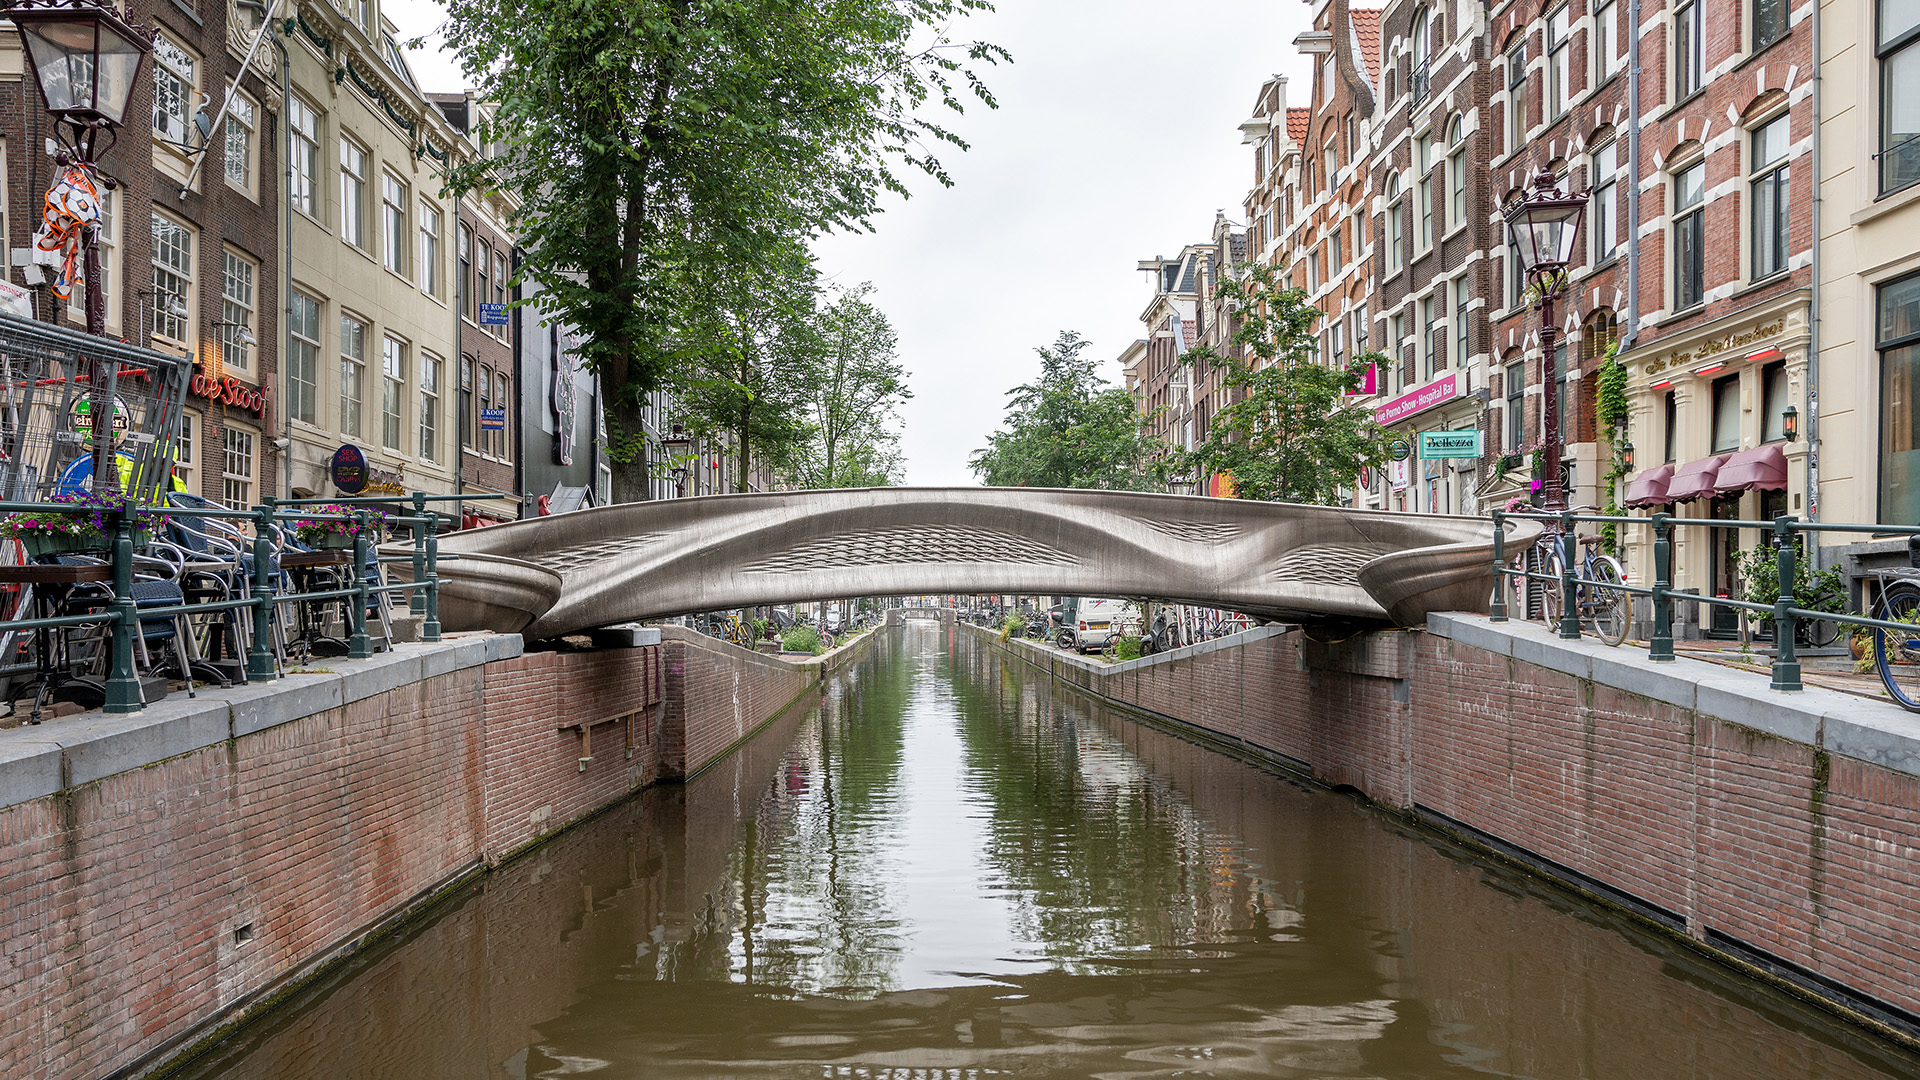 The 3D printed bridge installed in Amsterdam